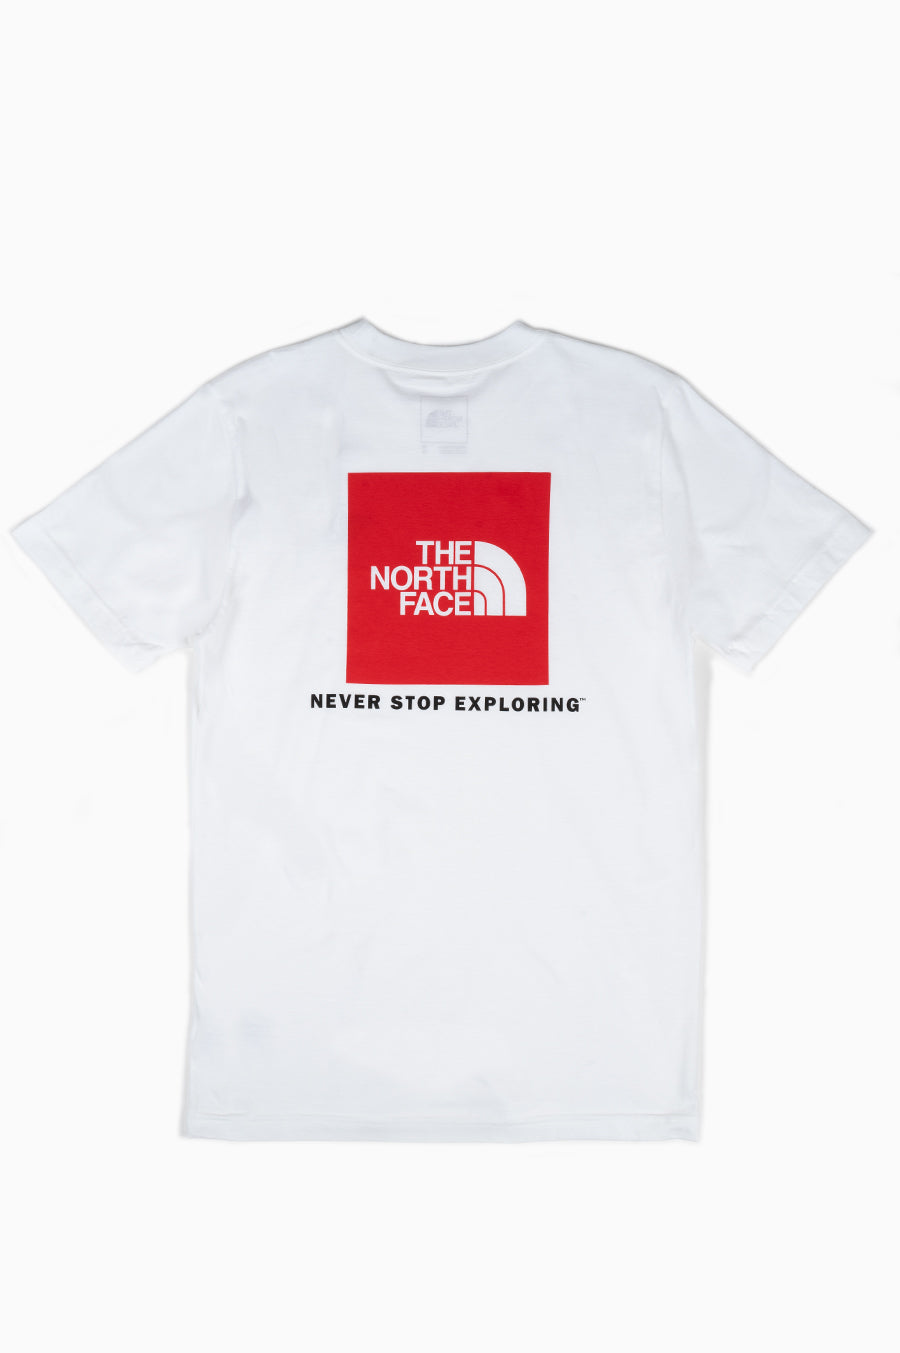 THE NORTH FACE S/S NEVER STOP EXPLORING TEE WHITE